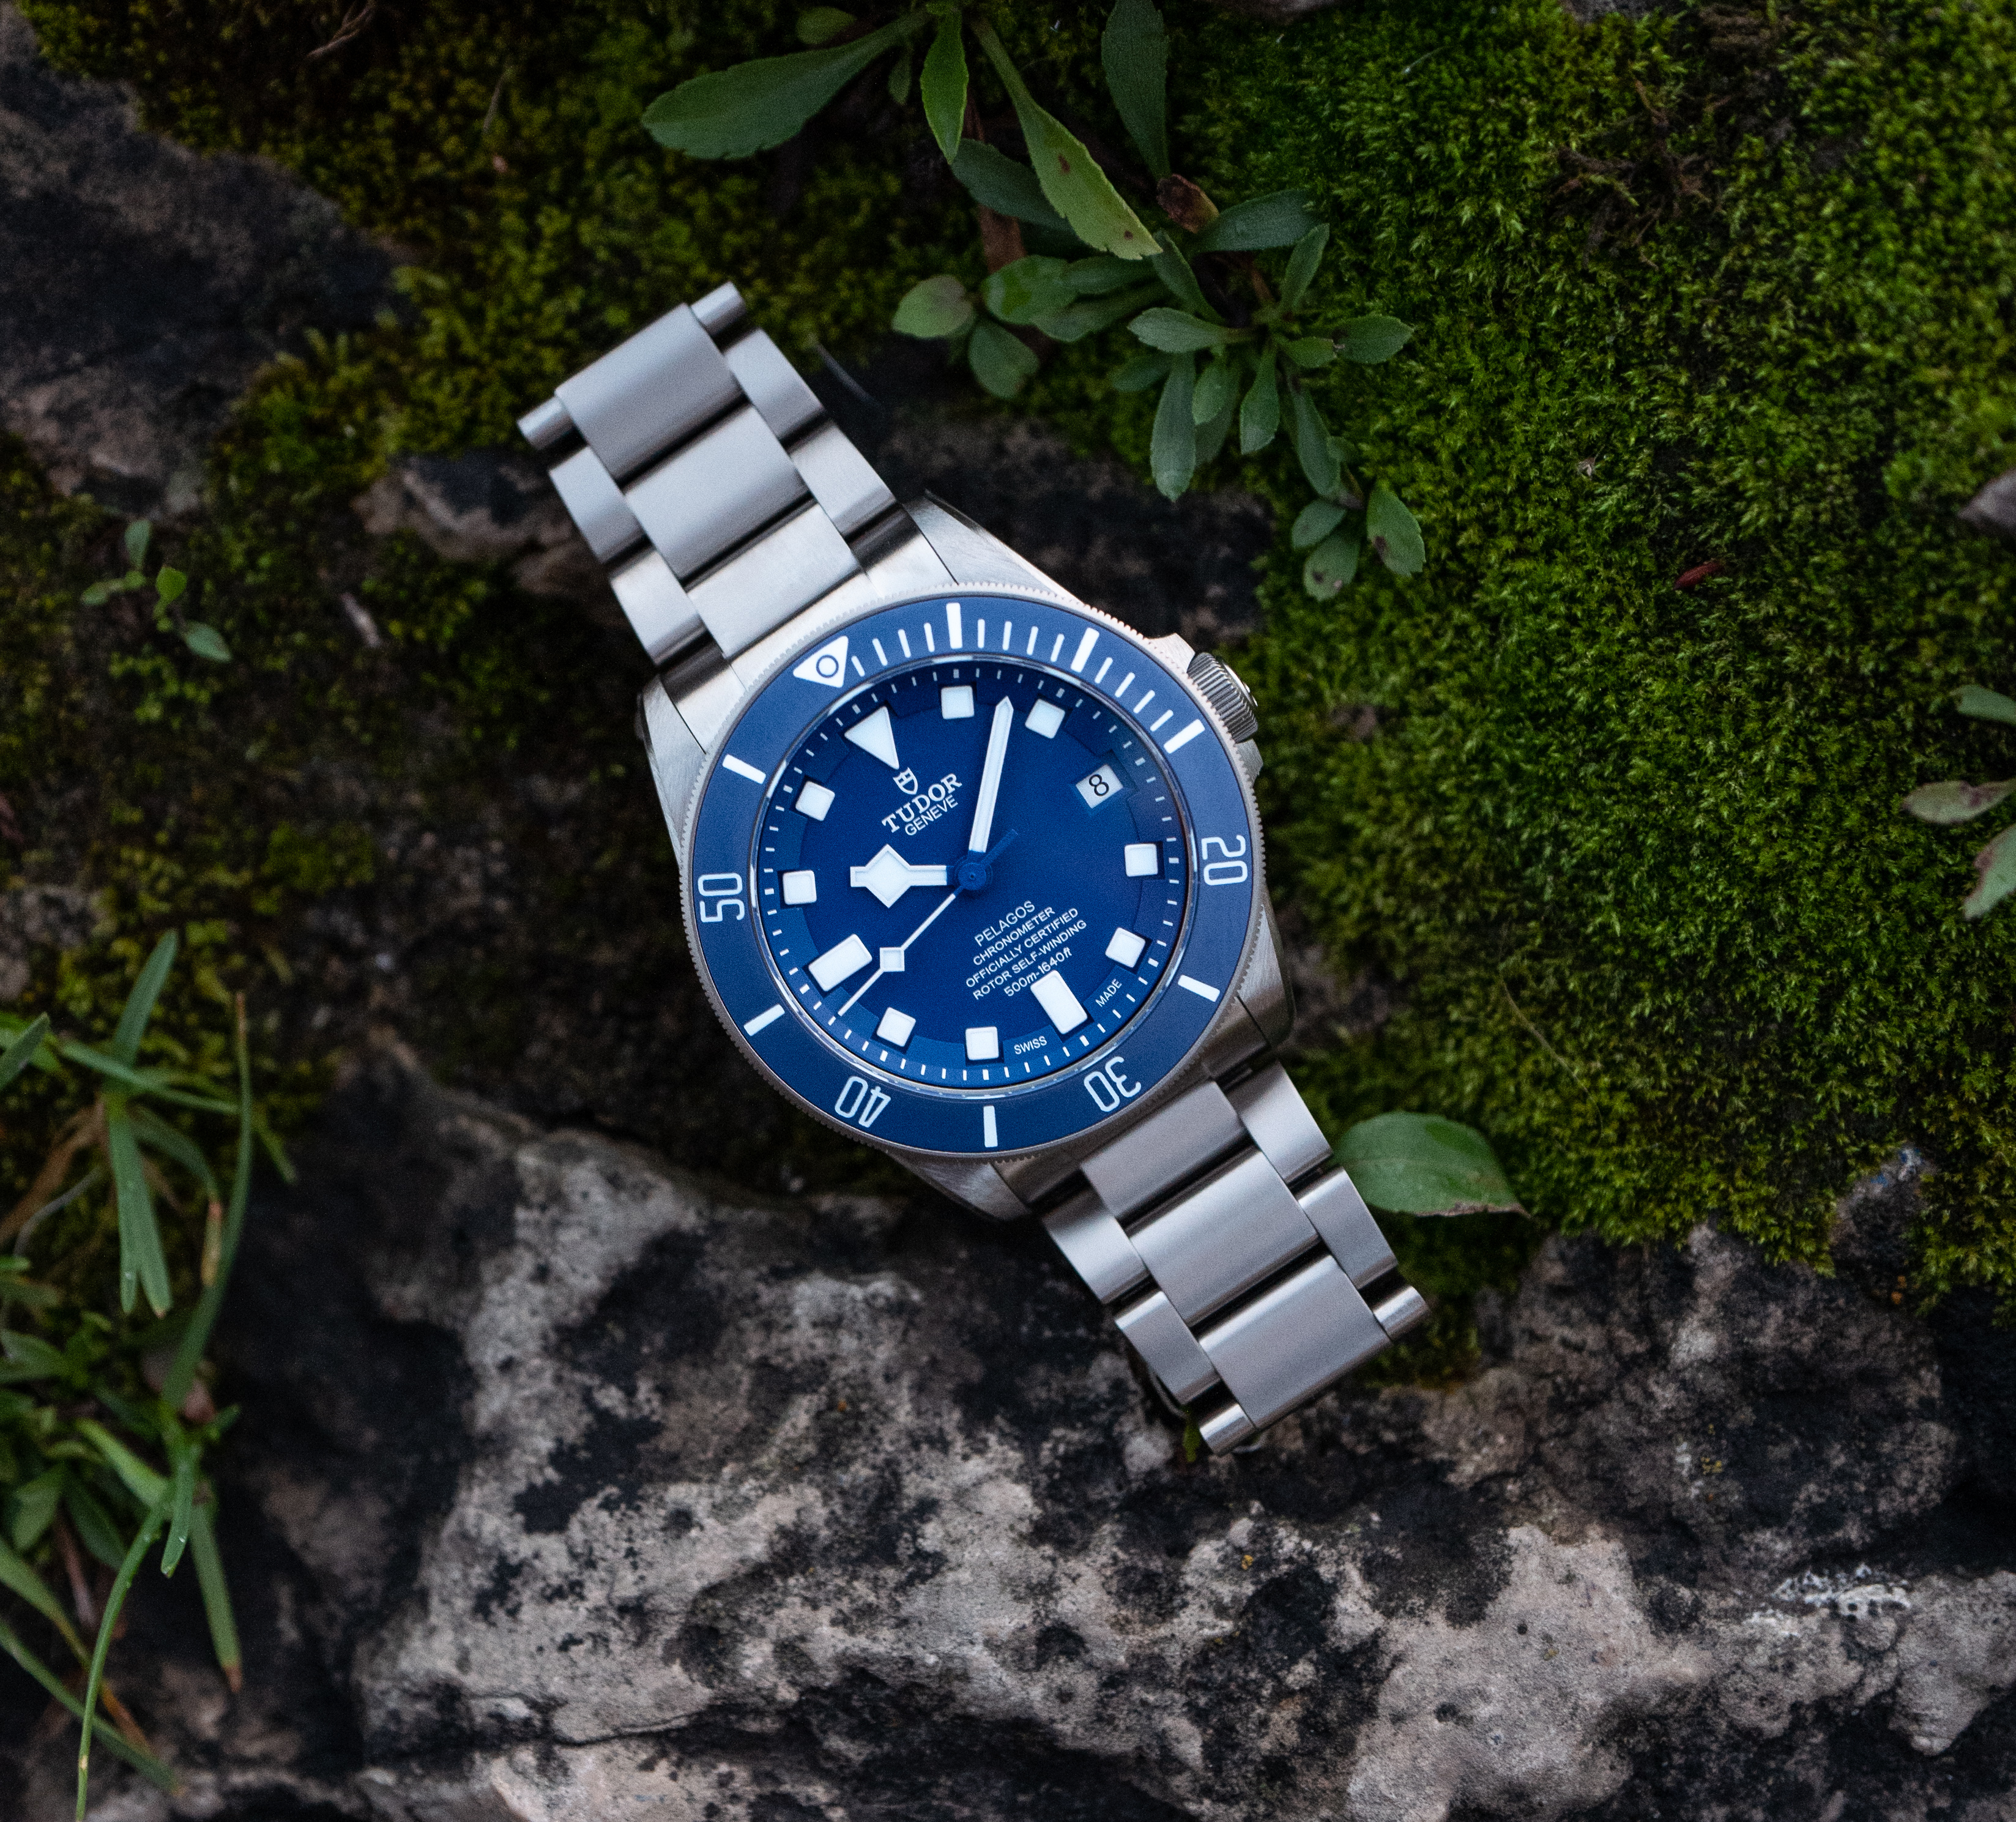 Certina Introduces Two Very Different and Intriguing Dive Watches to DS  Action Diver Lineup - Worn & Wound